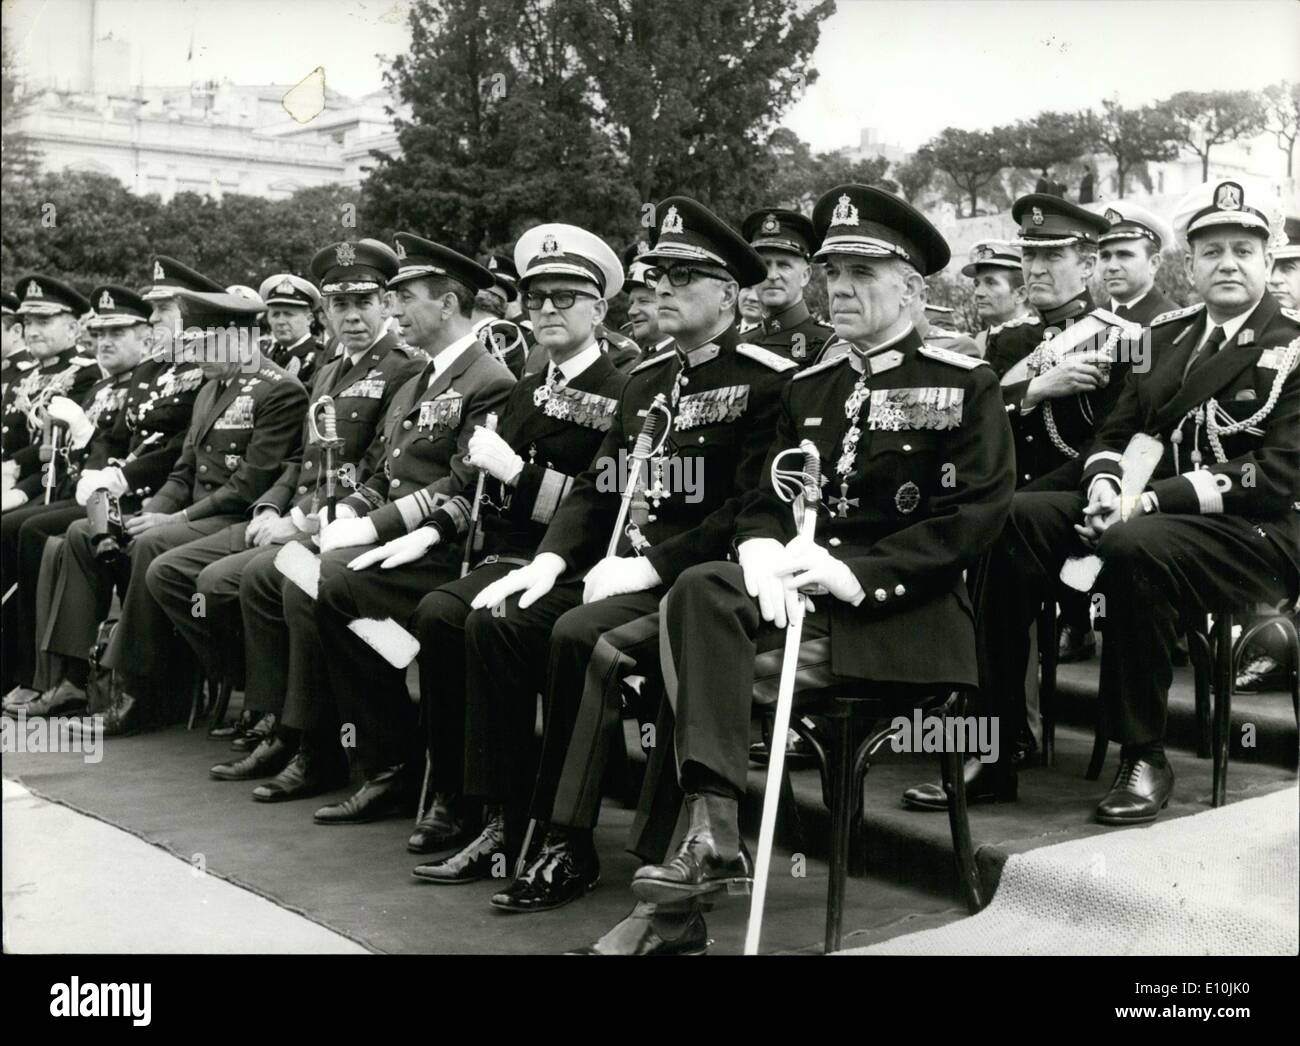 Mar. 03, 1973 - Greece's Armed Force Leaders seen watching the big military parade, on the occasion of the march 25th National Holiday. First now from right to left: General Democratic Zagorianakos, Chief of the Arny, Vice Admiral Constantine Margharitis, Chief of the Navy, Lieutenant General Thomas Mitsanas, Chief of the Air Force US Major General Charles W. Ryder, Jr. Commander of the John United States Military Group To Greece and other officials. Fyi - No. 3 - Incorrectly Identified: (Right to Left) 1. Angelis, Odysseus - Cmdr. Hellenic Armed Forces. 2. Zagosrianakos, Simitrics - Cmdr Stock Photo